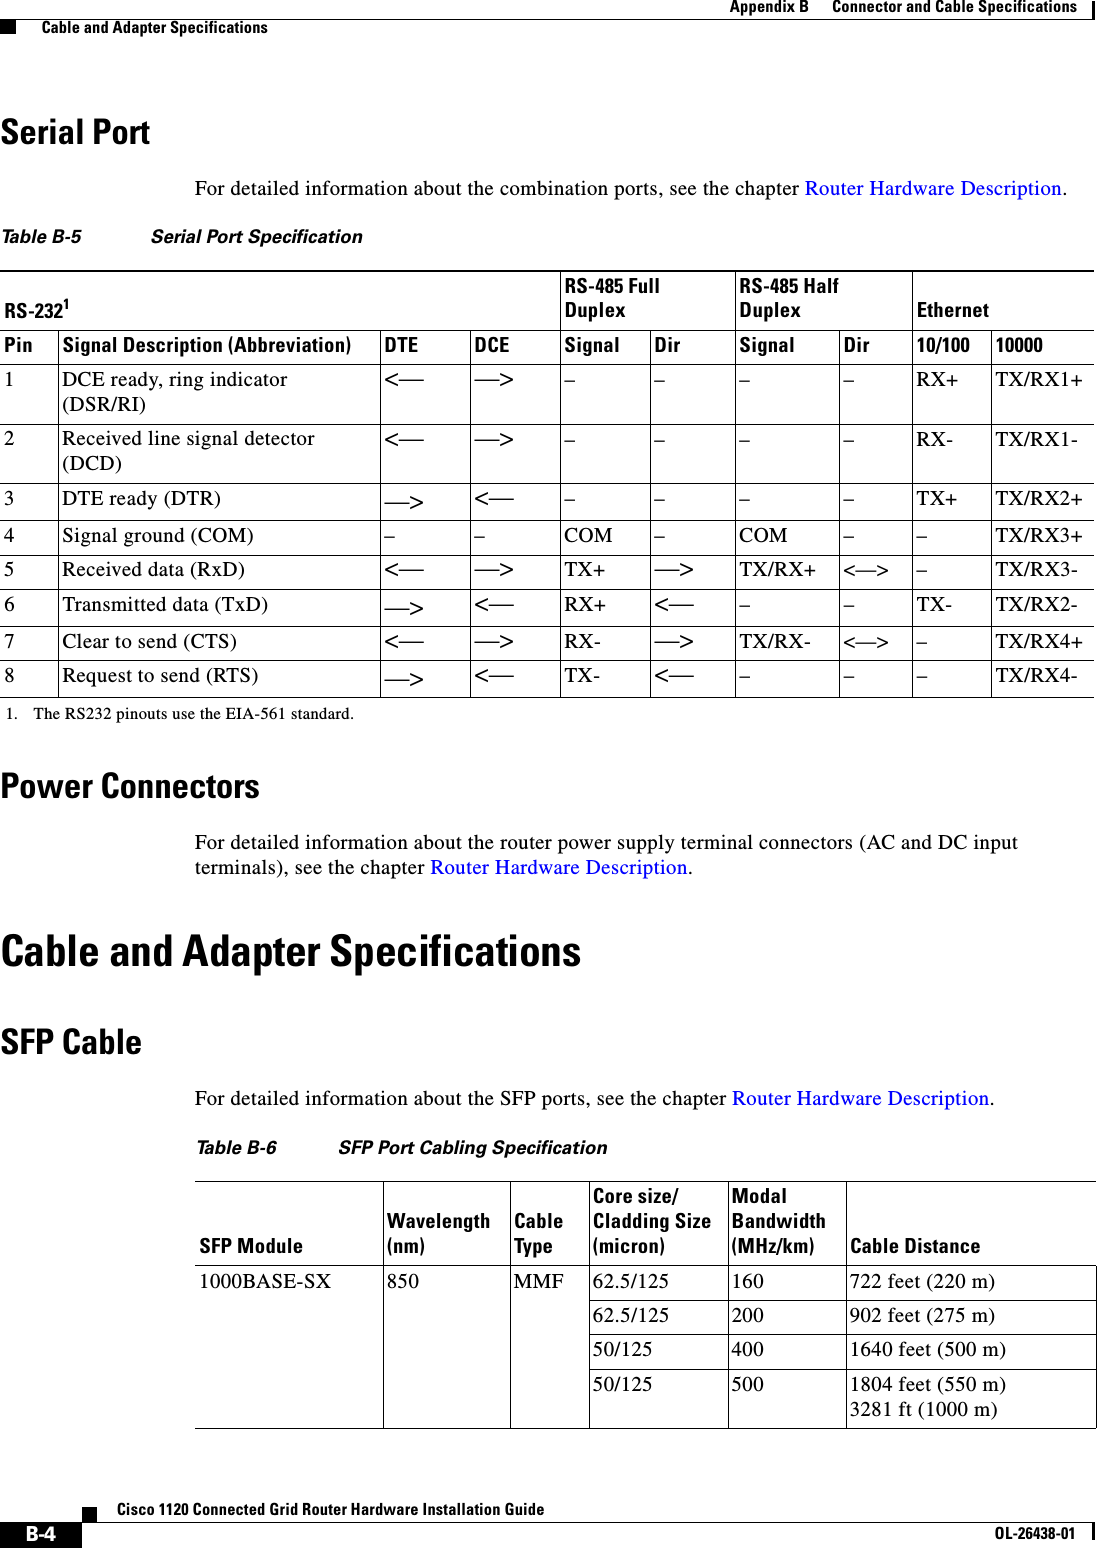  B-4Cisco 1120 Connected Grid Router Hardware Installation GuideOL-26438-01Appendix B      Connector and Cable Specifications  Cable and Adapter SpecificationsSerial PortFor detailed information about the combination ports, see the chapter Router Hardware Description.Power ConnectorsFor detailed information about the router power supply terminal connectors (AC and DC input terminals), see the chapter Router Hardware Description.Cable and Adapter SpecificationsSFP CableFor detailed information about the SFP ports, see the chapter Router Hardware Description.Table B-5 Serial Port SpecificationRS-23211. The RS232 pinouts use the EIA-561 standard.RS-485 Full DuplexRS-485 Half Duplex EthernetPin Signal Description (Abbreviation) DTE DCE Signal Dir Signal Dir 10/100 100001 DCE ready, ring indicator (DSR/RI)&lt;— —&gt; – – – – RX+ TX/RX1+2 Received line signal detector (DCD)&lt;— —&gt; – – – – RX- TX/RX1-3 DTE ready (DTR) —&gt; &lt;— ––– –TX+TX/RX2+4 Signal ground (COM) – – COM – COM – – TX/RX3+5 Received data (RxD) &lt;— —&gt; TX+ —&gt; TX/RX+ &lt;—&gt; – TX/RX3-6 Transmitted data (TxD) —&gt; &lt;— RX+ &lt;— ––TX-TX/RX2-7 Clear to send (CTS) &lt;— —&gt; RX- —&gt; TX/RX- &lt;—&gt; – TX/RX4+8 Request to send (RTS) —&gt; &lt;— TX- &lt;— –––TX/RX4-Table B-6 SFP Port Cabling SpecificationSFP ModuleWavelength (nm)Cable TypeCore size/Cladding Size (micron)Modal Bandwidth(MHz/km) Cable Distance1000BASE-SX 850 MMF 62.5/125 160 722 feet (220 m)62.5/125 200 902 feet (275 m)50/125 400 1640 feet (500 m)50/125 500 1804 feet (550 m)3281 ft (1000 m)